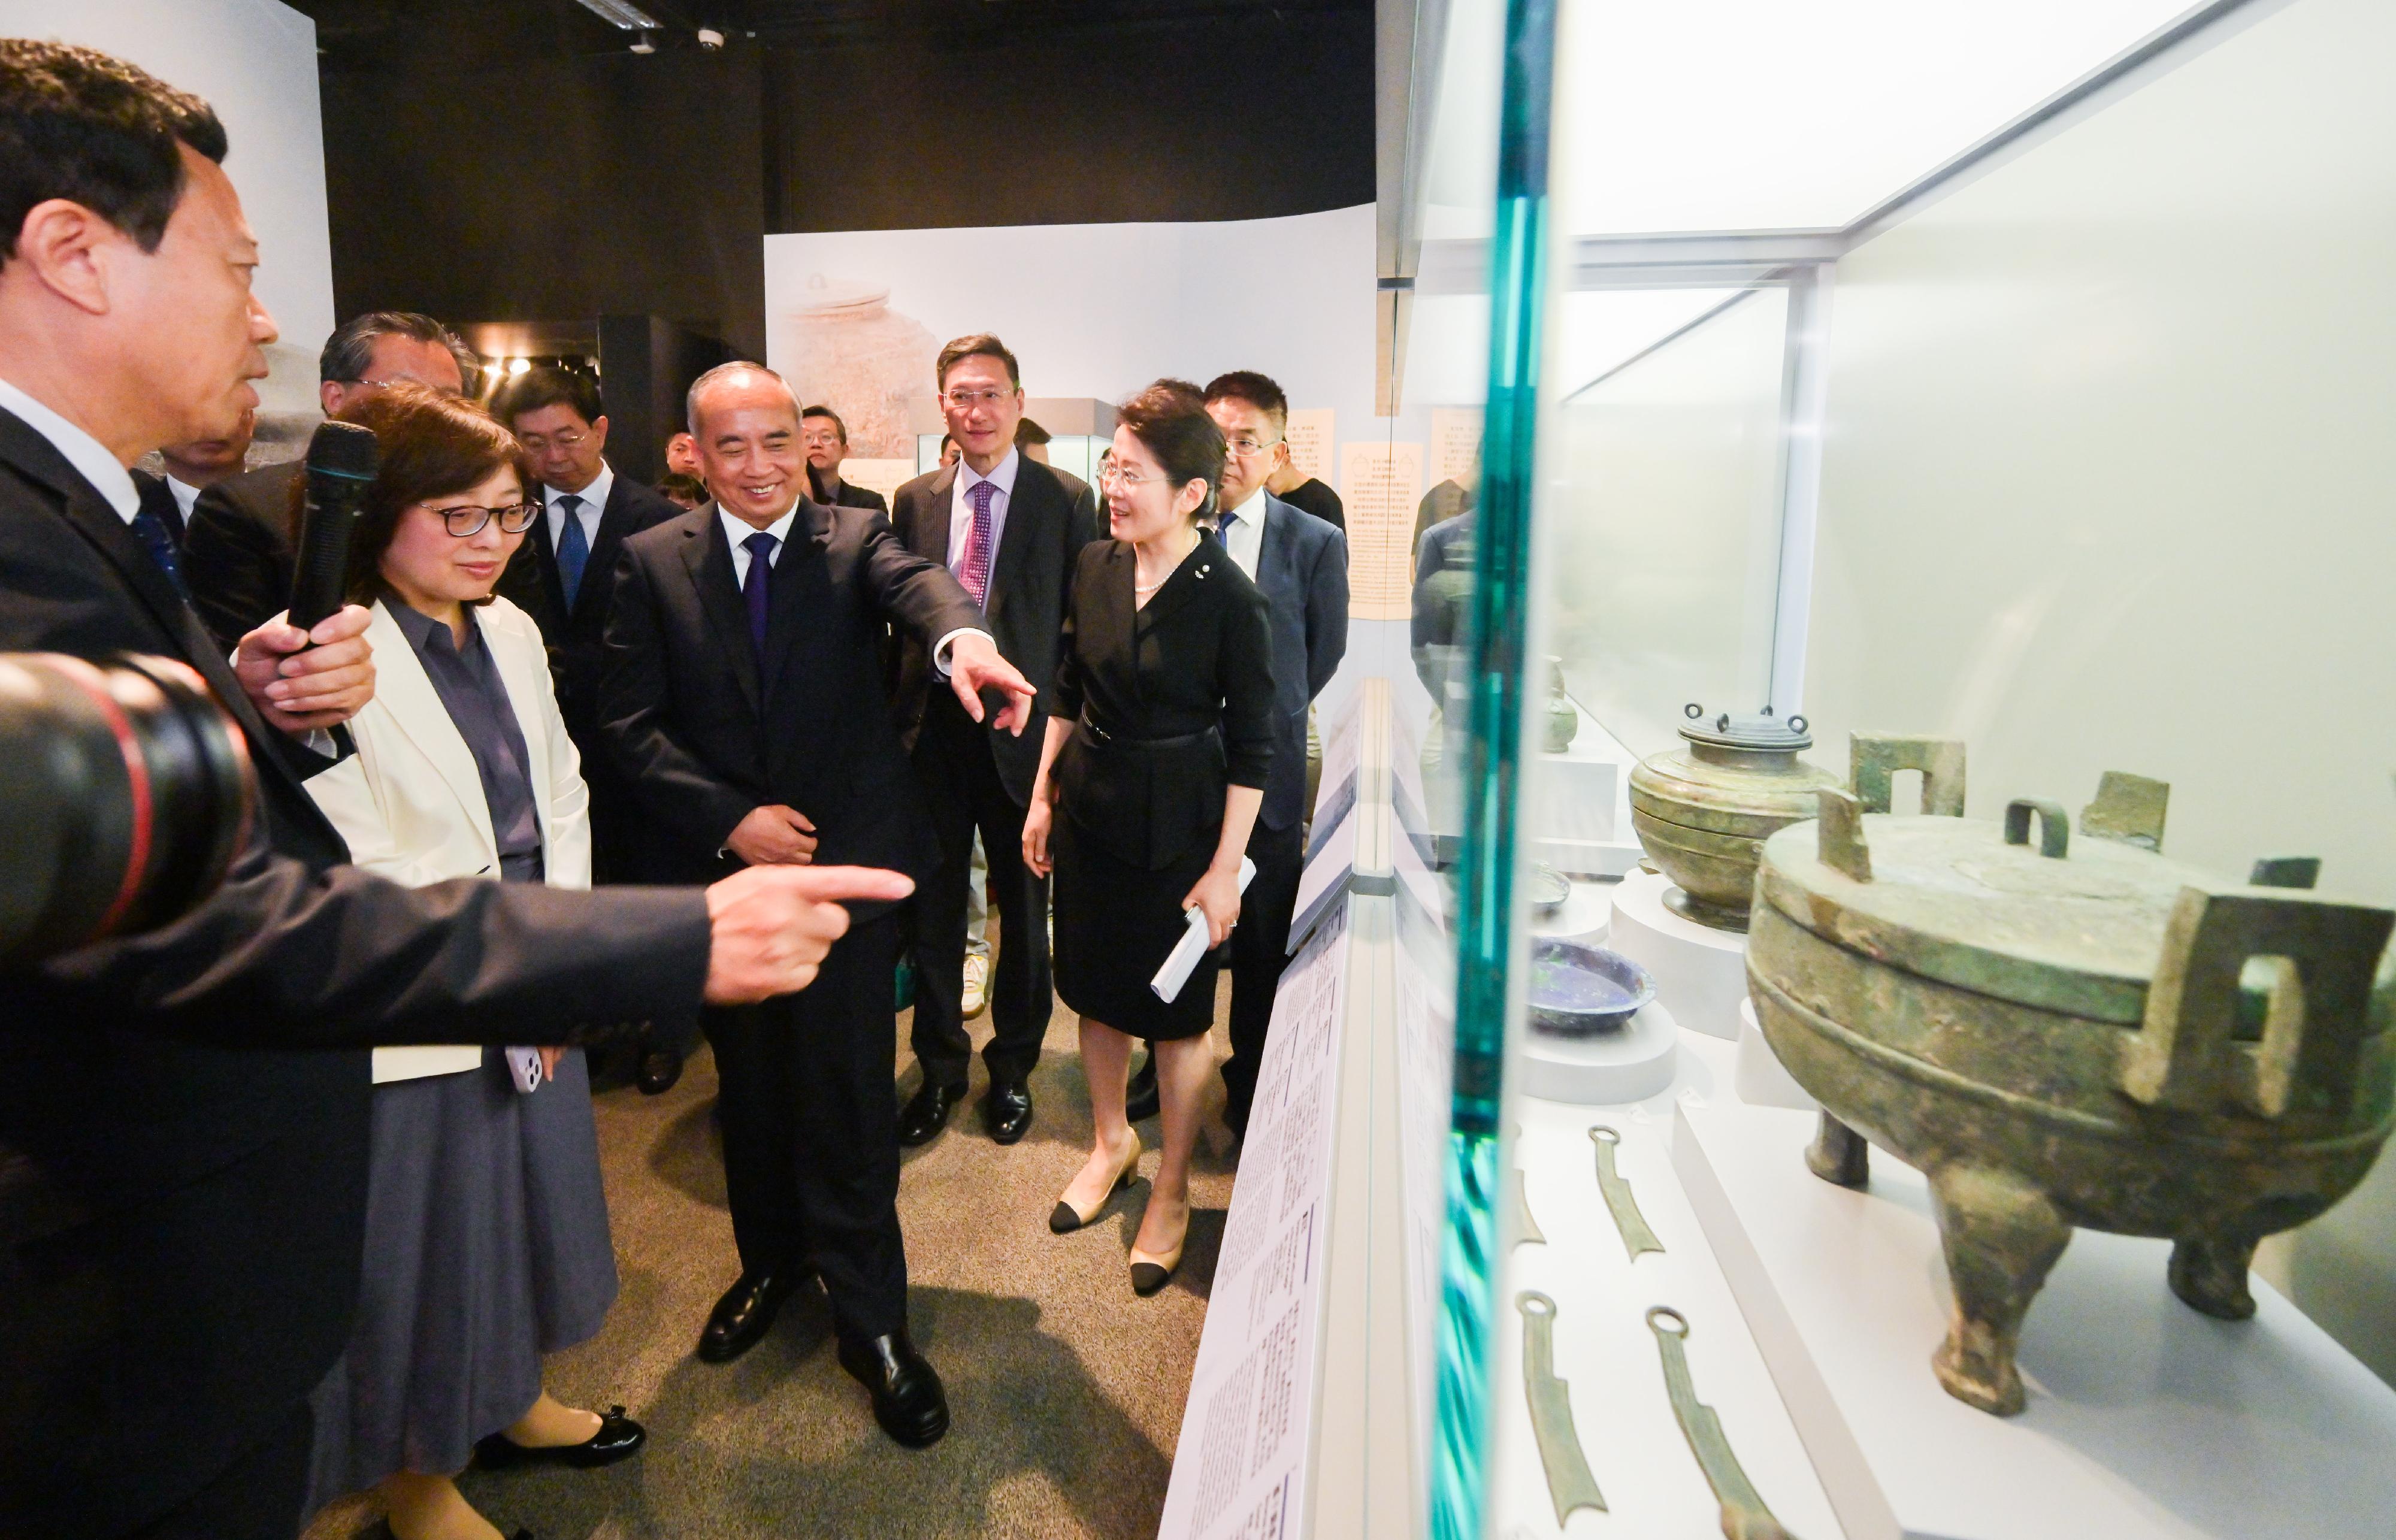 The "Harmony of Rites and Music: Exploring the Qilu Culture through Shandong Relics" exhibition opened today (May 28). Photo shows the Secretary for Development, Ms Bernadette Linn (second left); the Secretary of the Shandong Provincial Committee and Chairman of the Standing Committee of Shandong Provincial People’s Congress, Mr Lin Wu (third left); and the Director-General of Shandong Provincial Department of Culture and Tourism, Ms Wang Lei (first right), touring the exhibition.